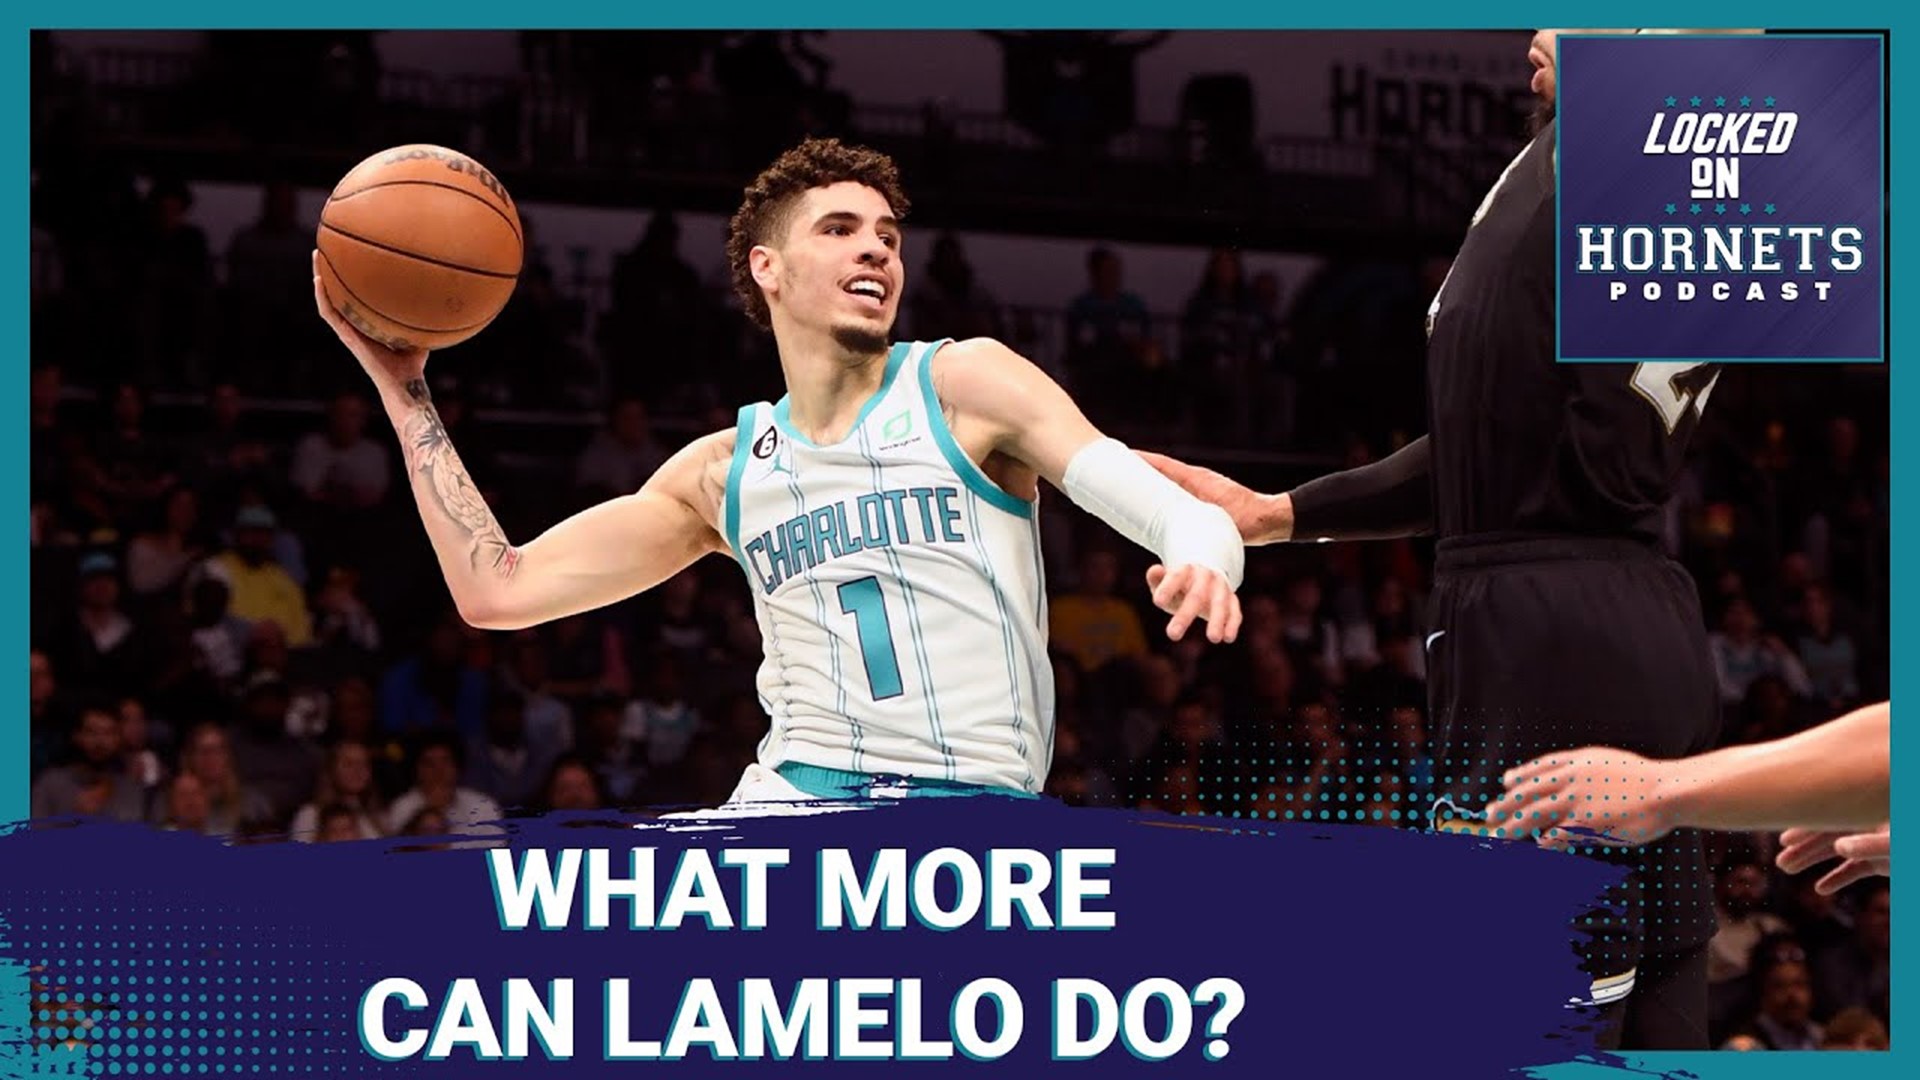 LaMelo Ball logs his 1,000th career assist, but his double-double wasn't nearly enough against the Memphis Grizzlies.